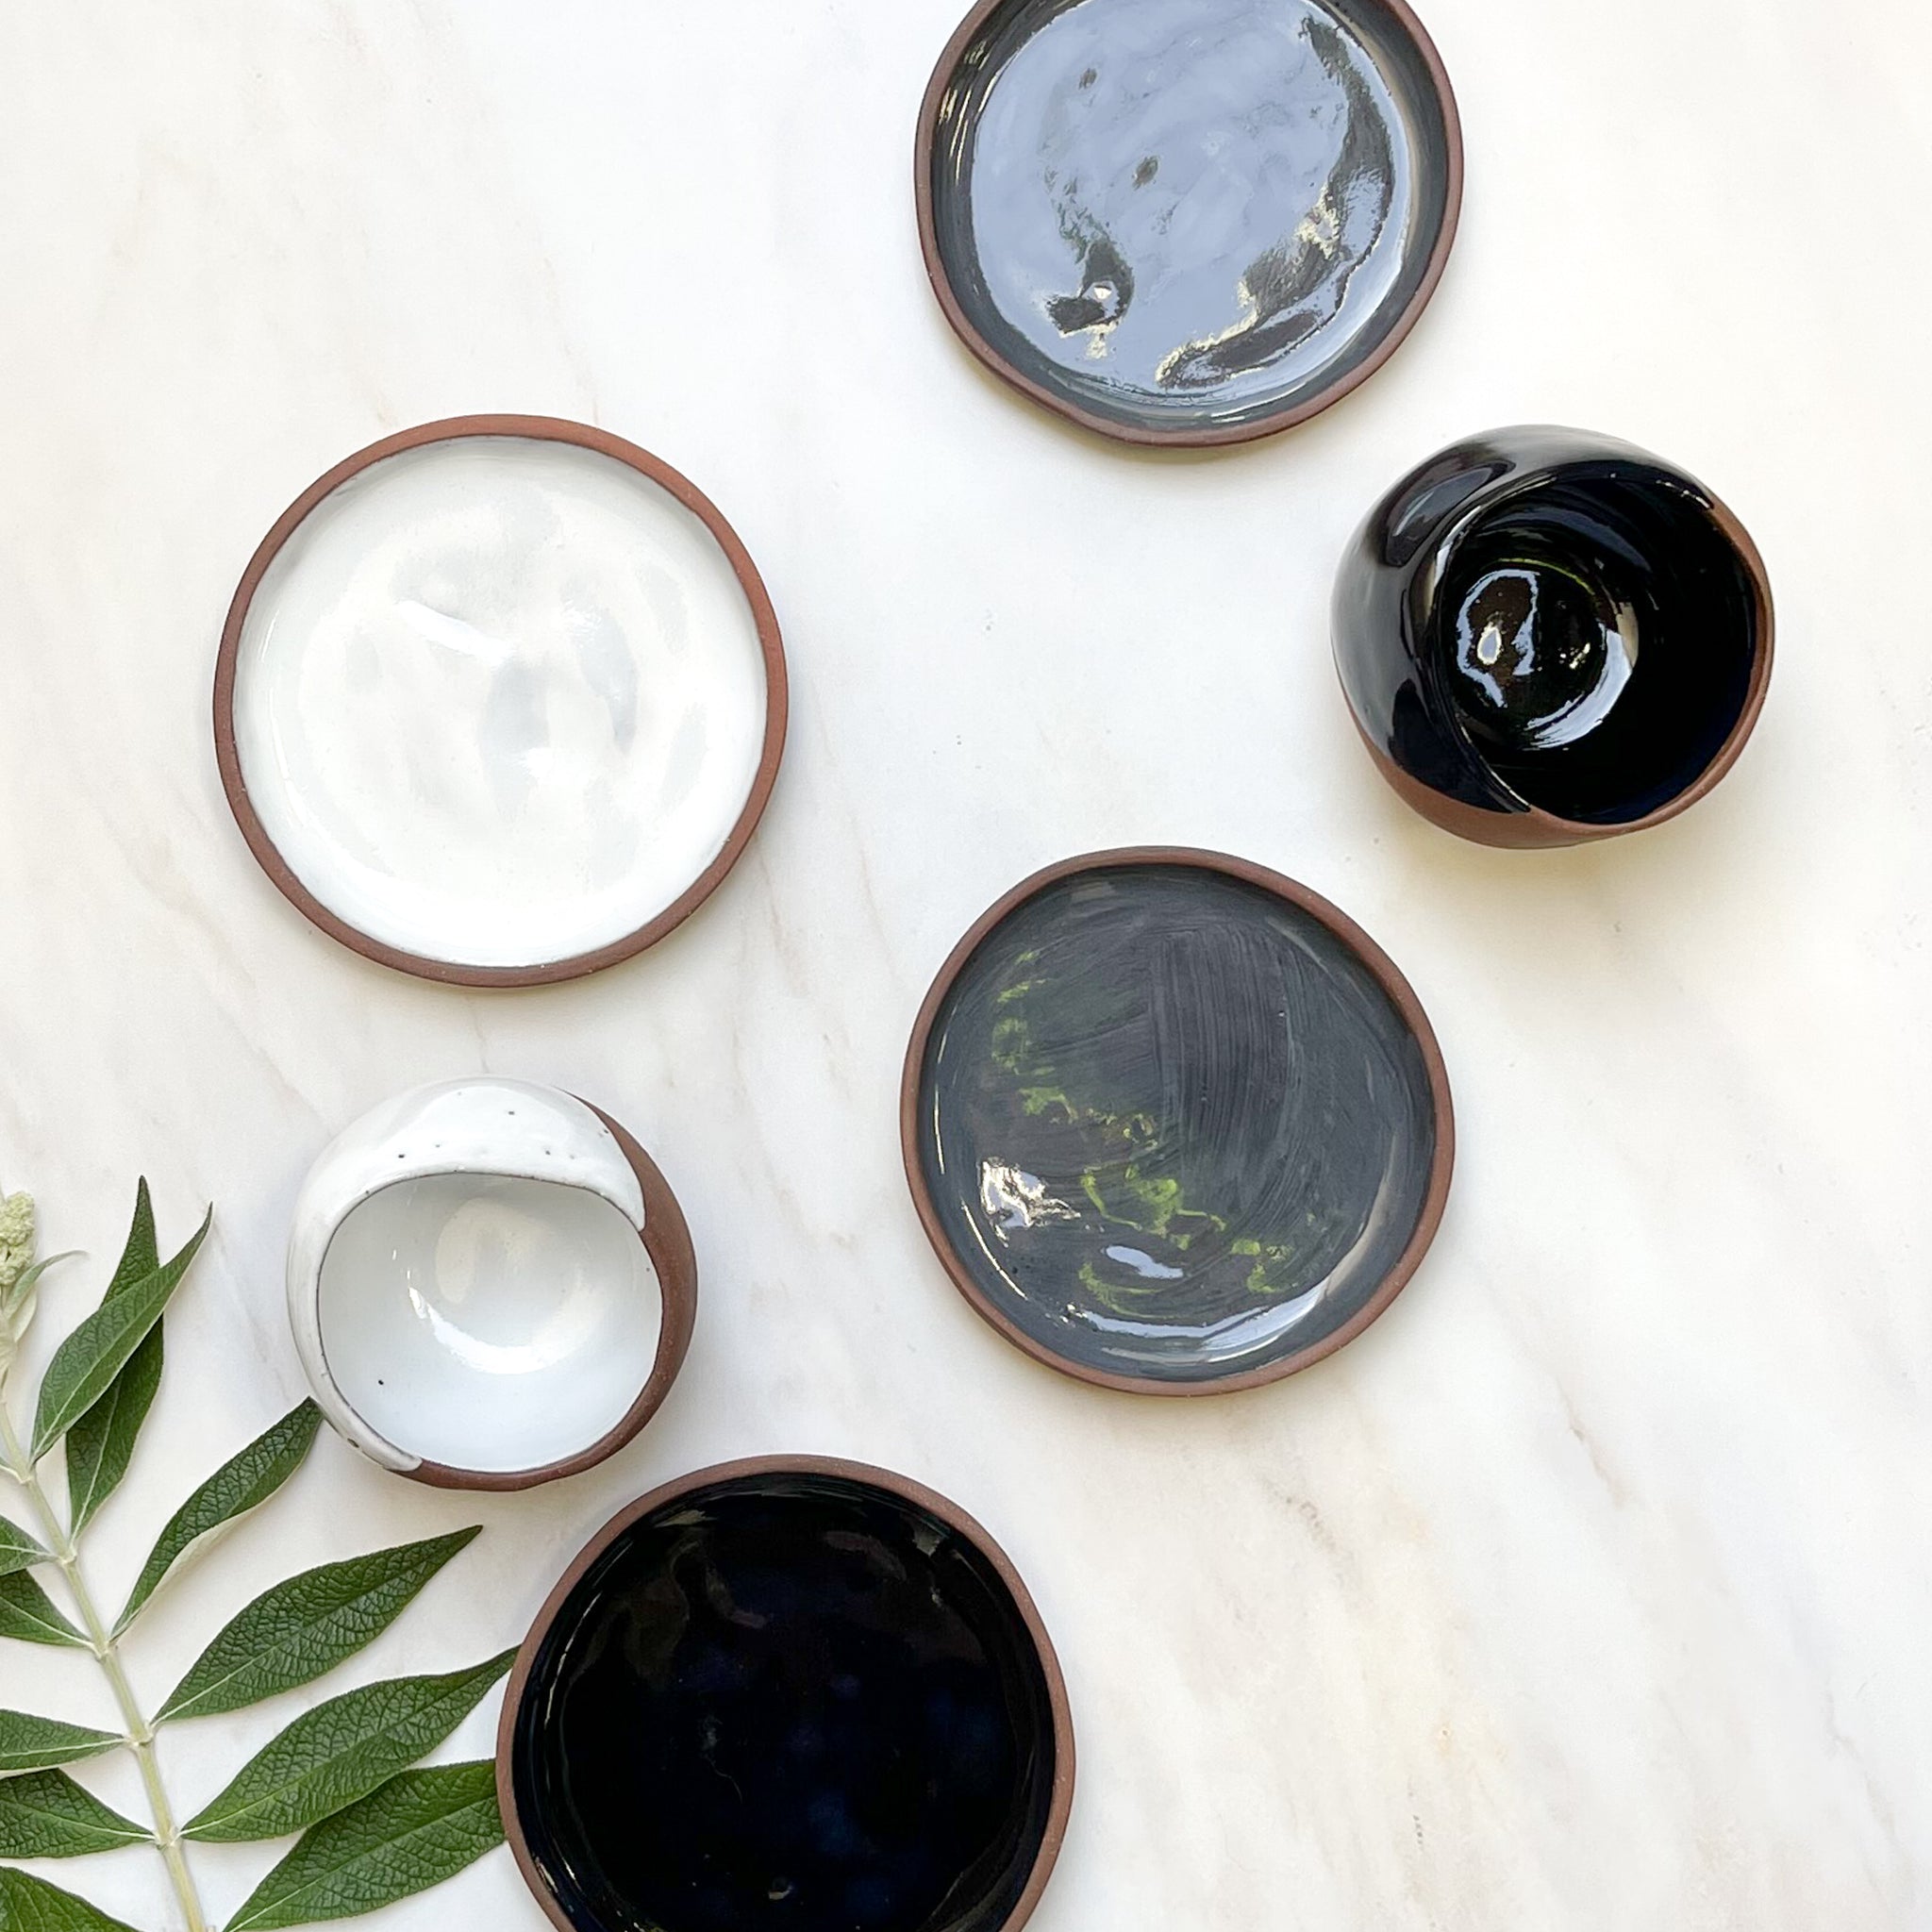 A set of small ceramic plates and cups handmade in Baja, Mexico on a white marble counter.